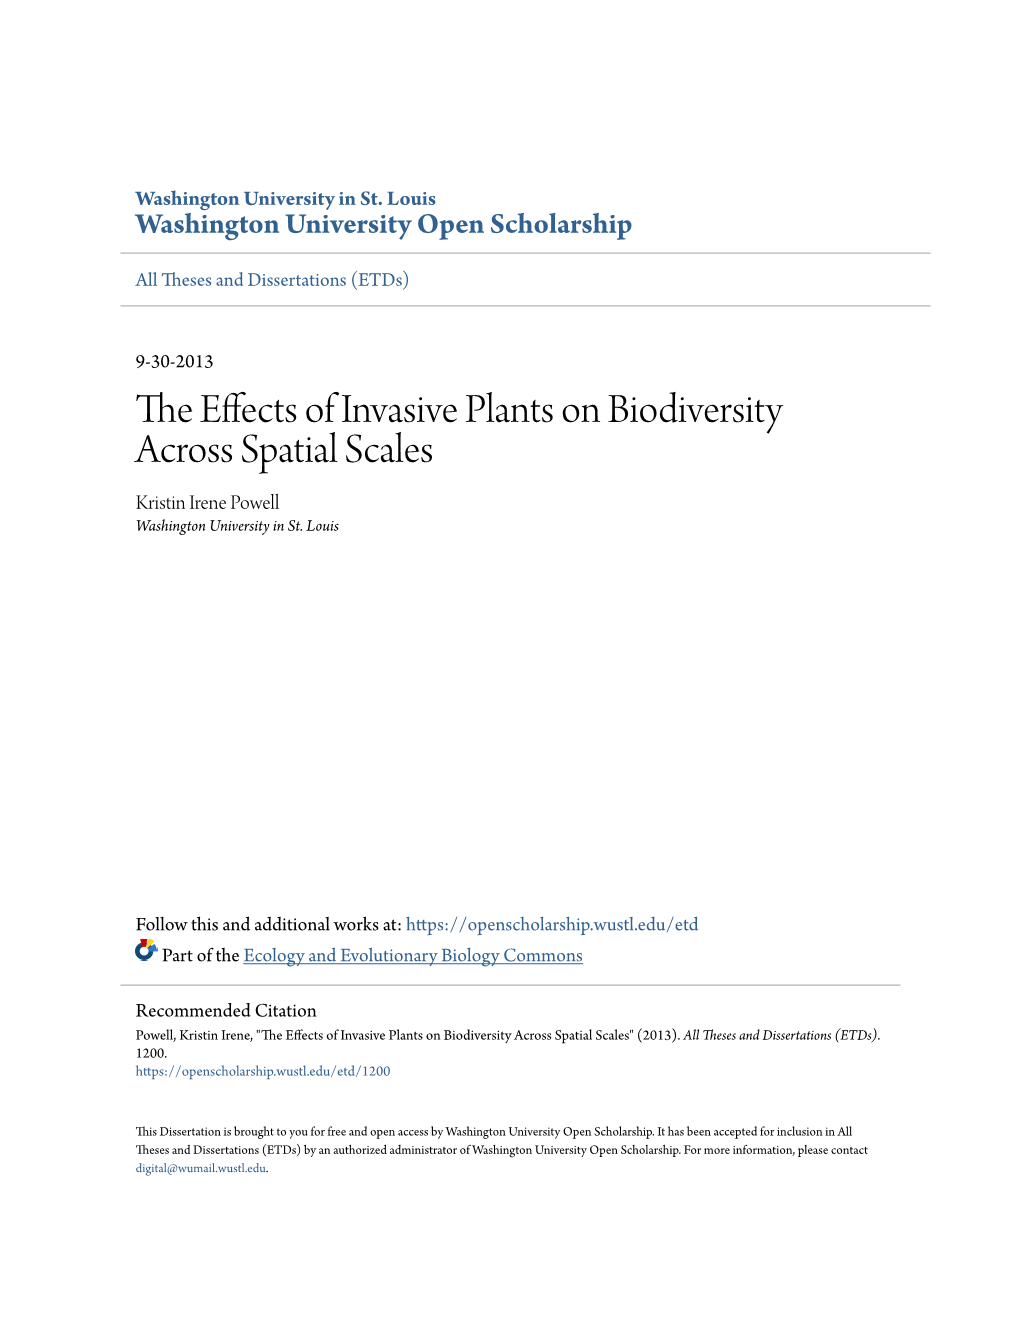 The Effects of Invasive Plants on Biodiversity Across Spatial Scales" (2013)